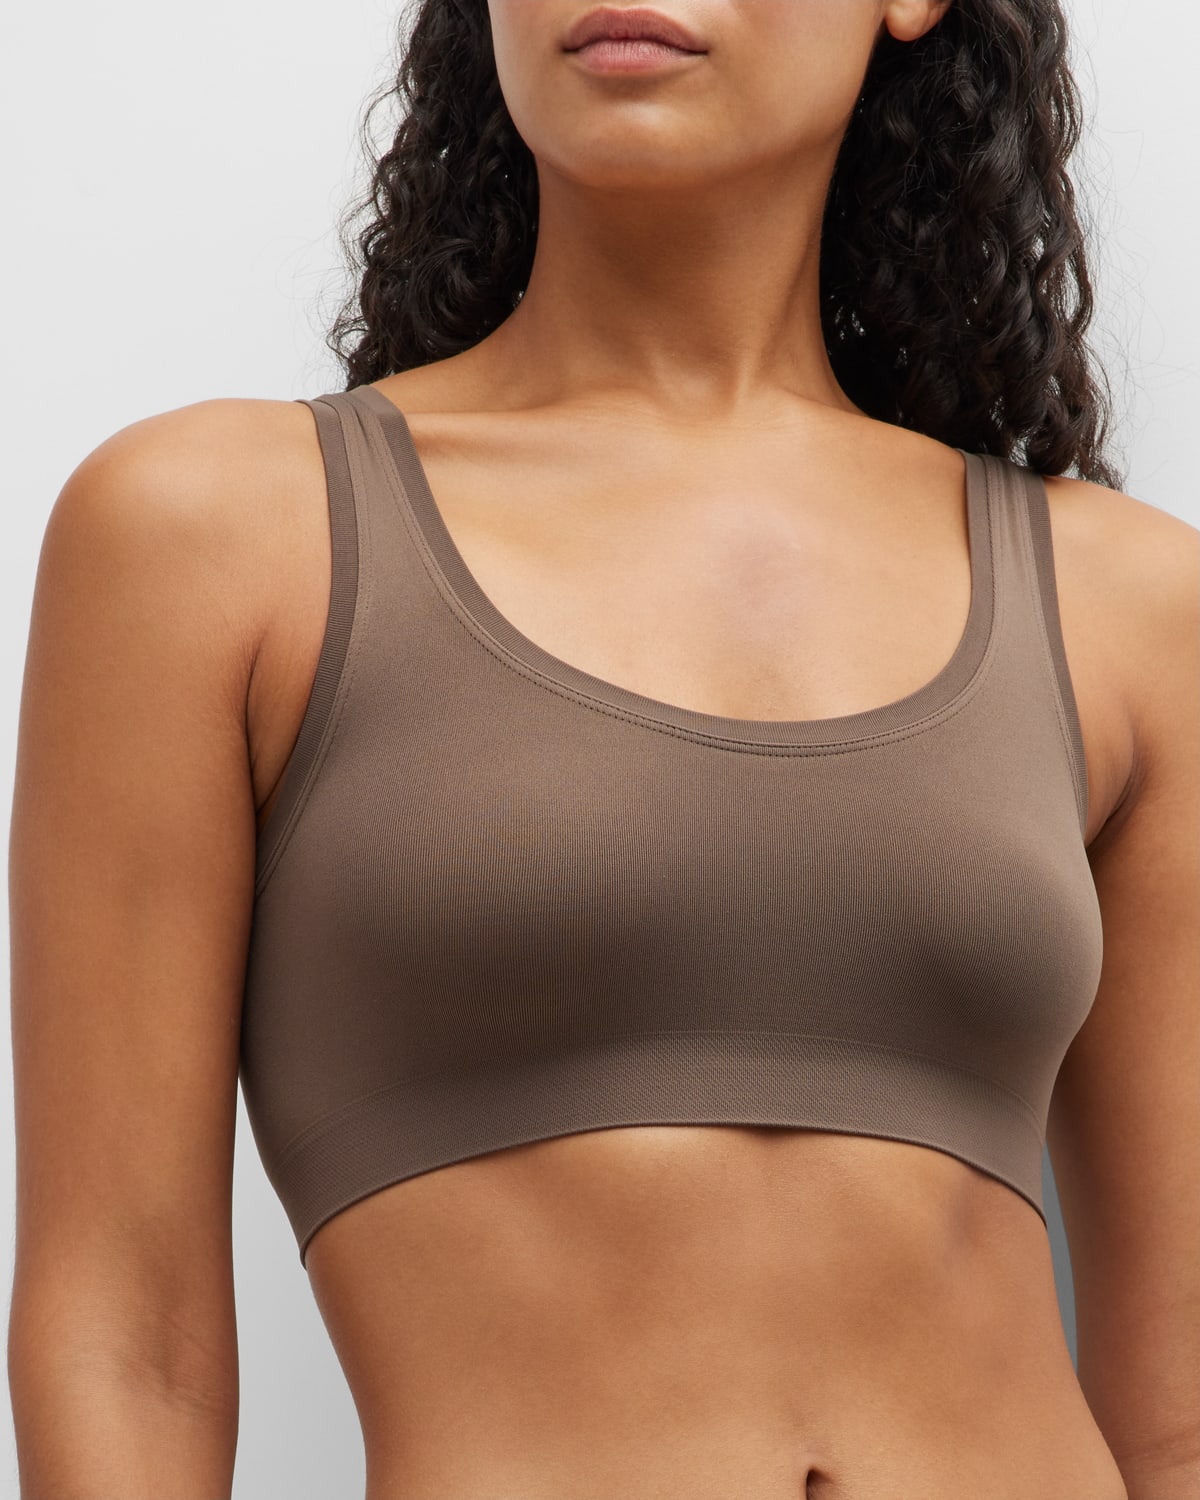 HANRO TOUCH FEELING CROP TOP